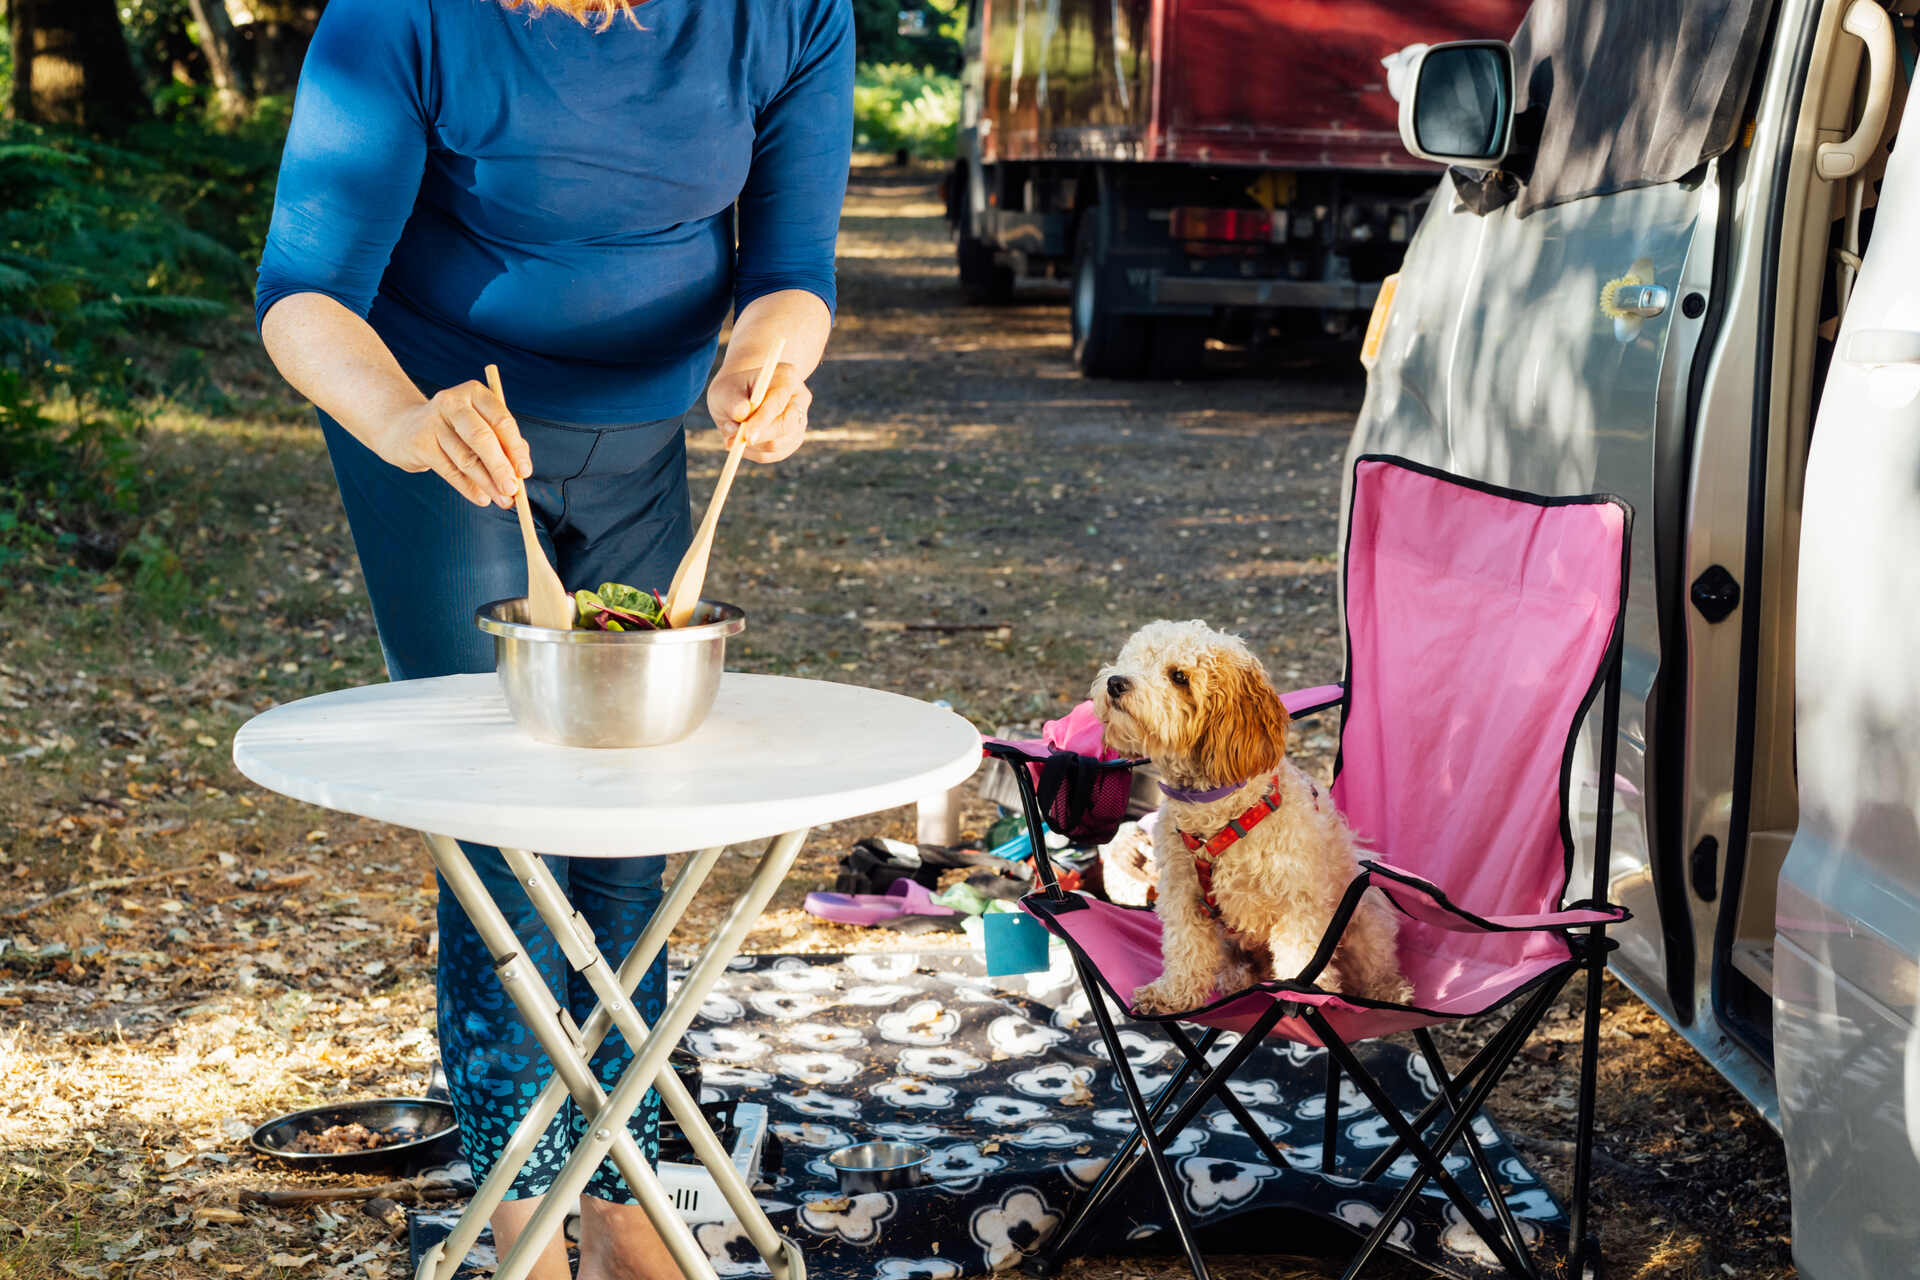 A dog sitting on a camping chair as a woman prepares a meal